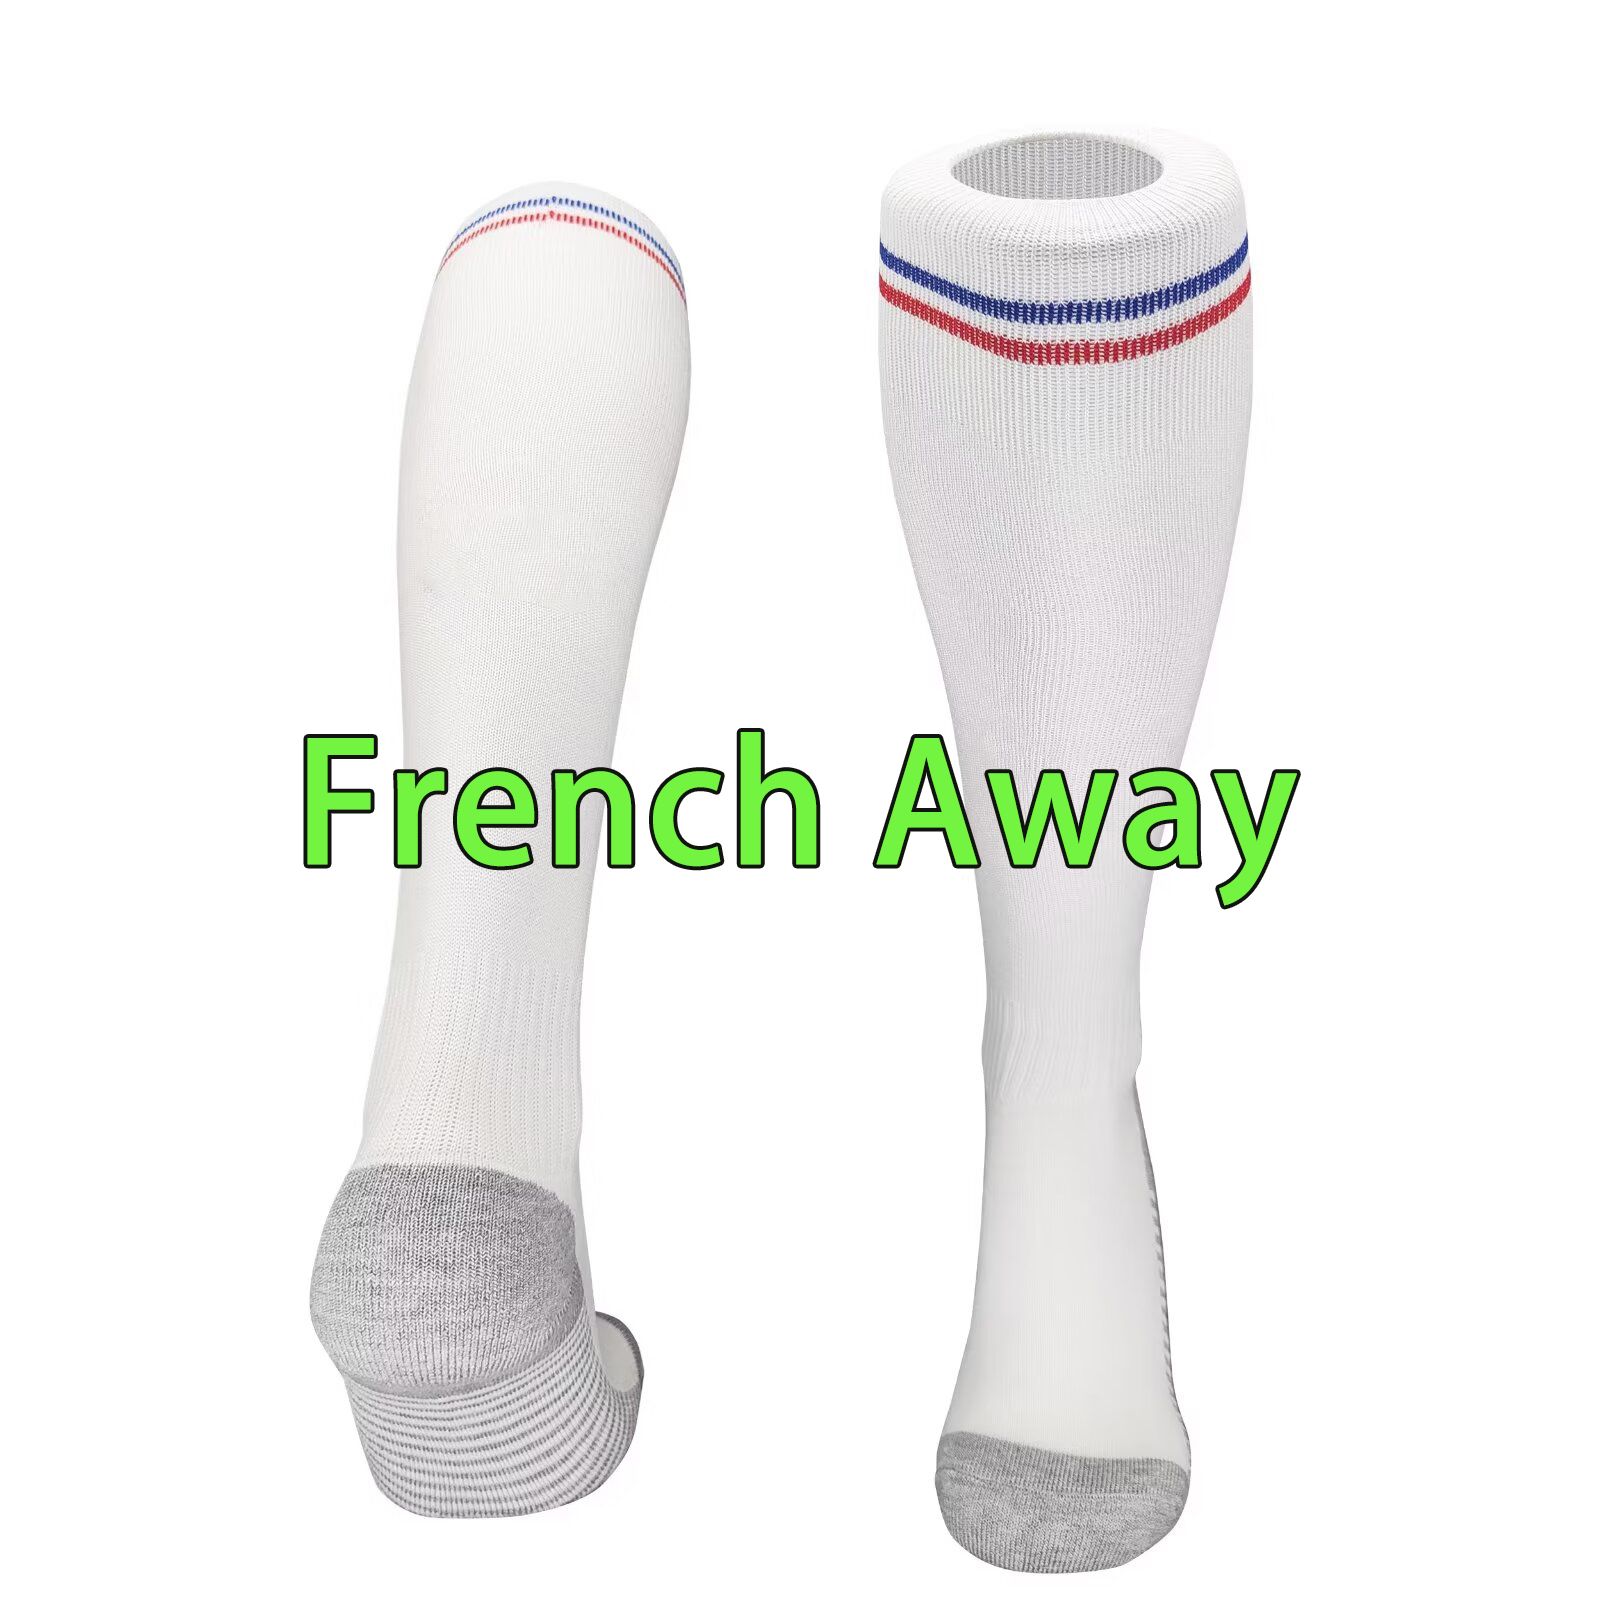 French away